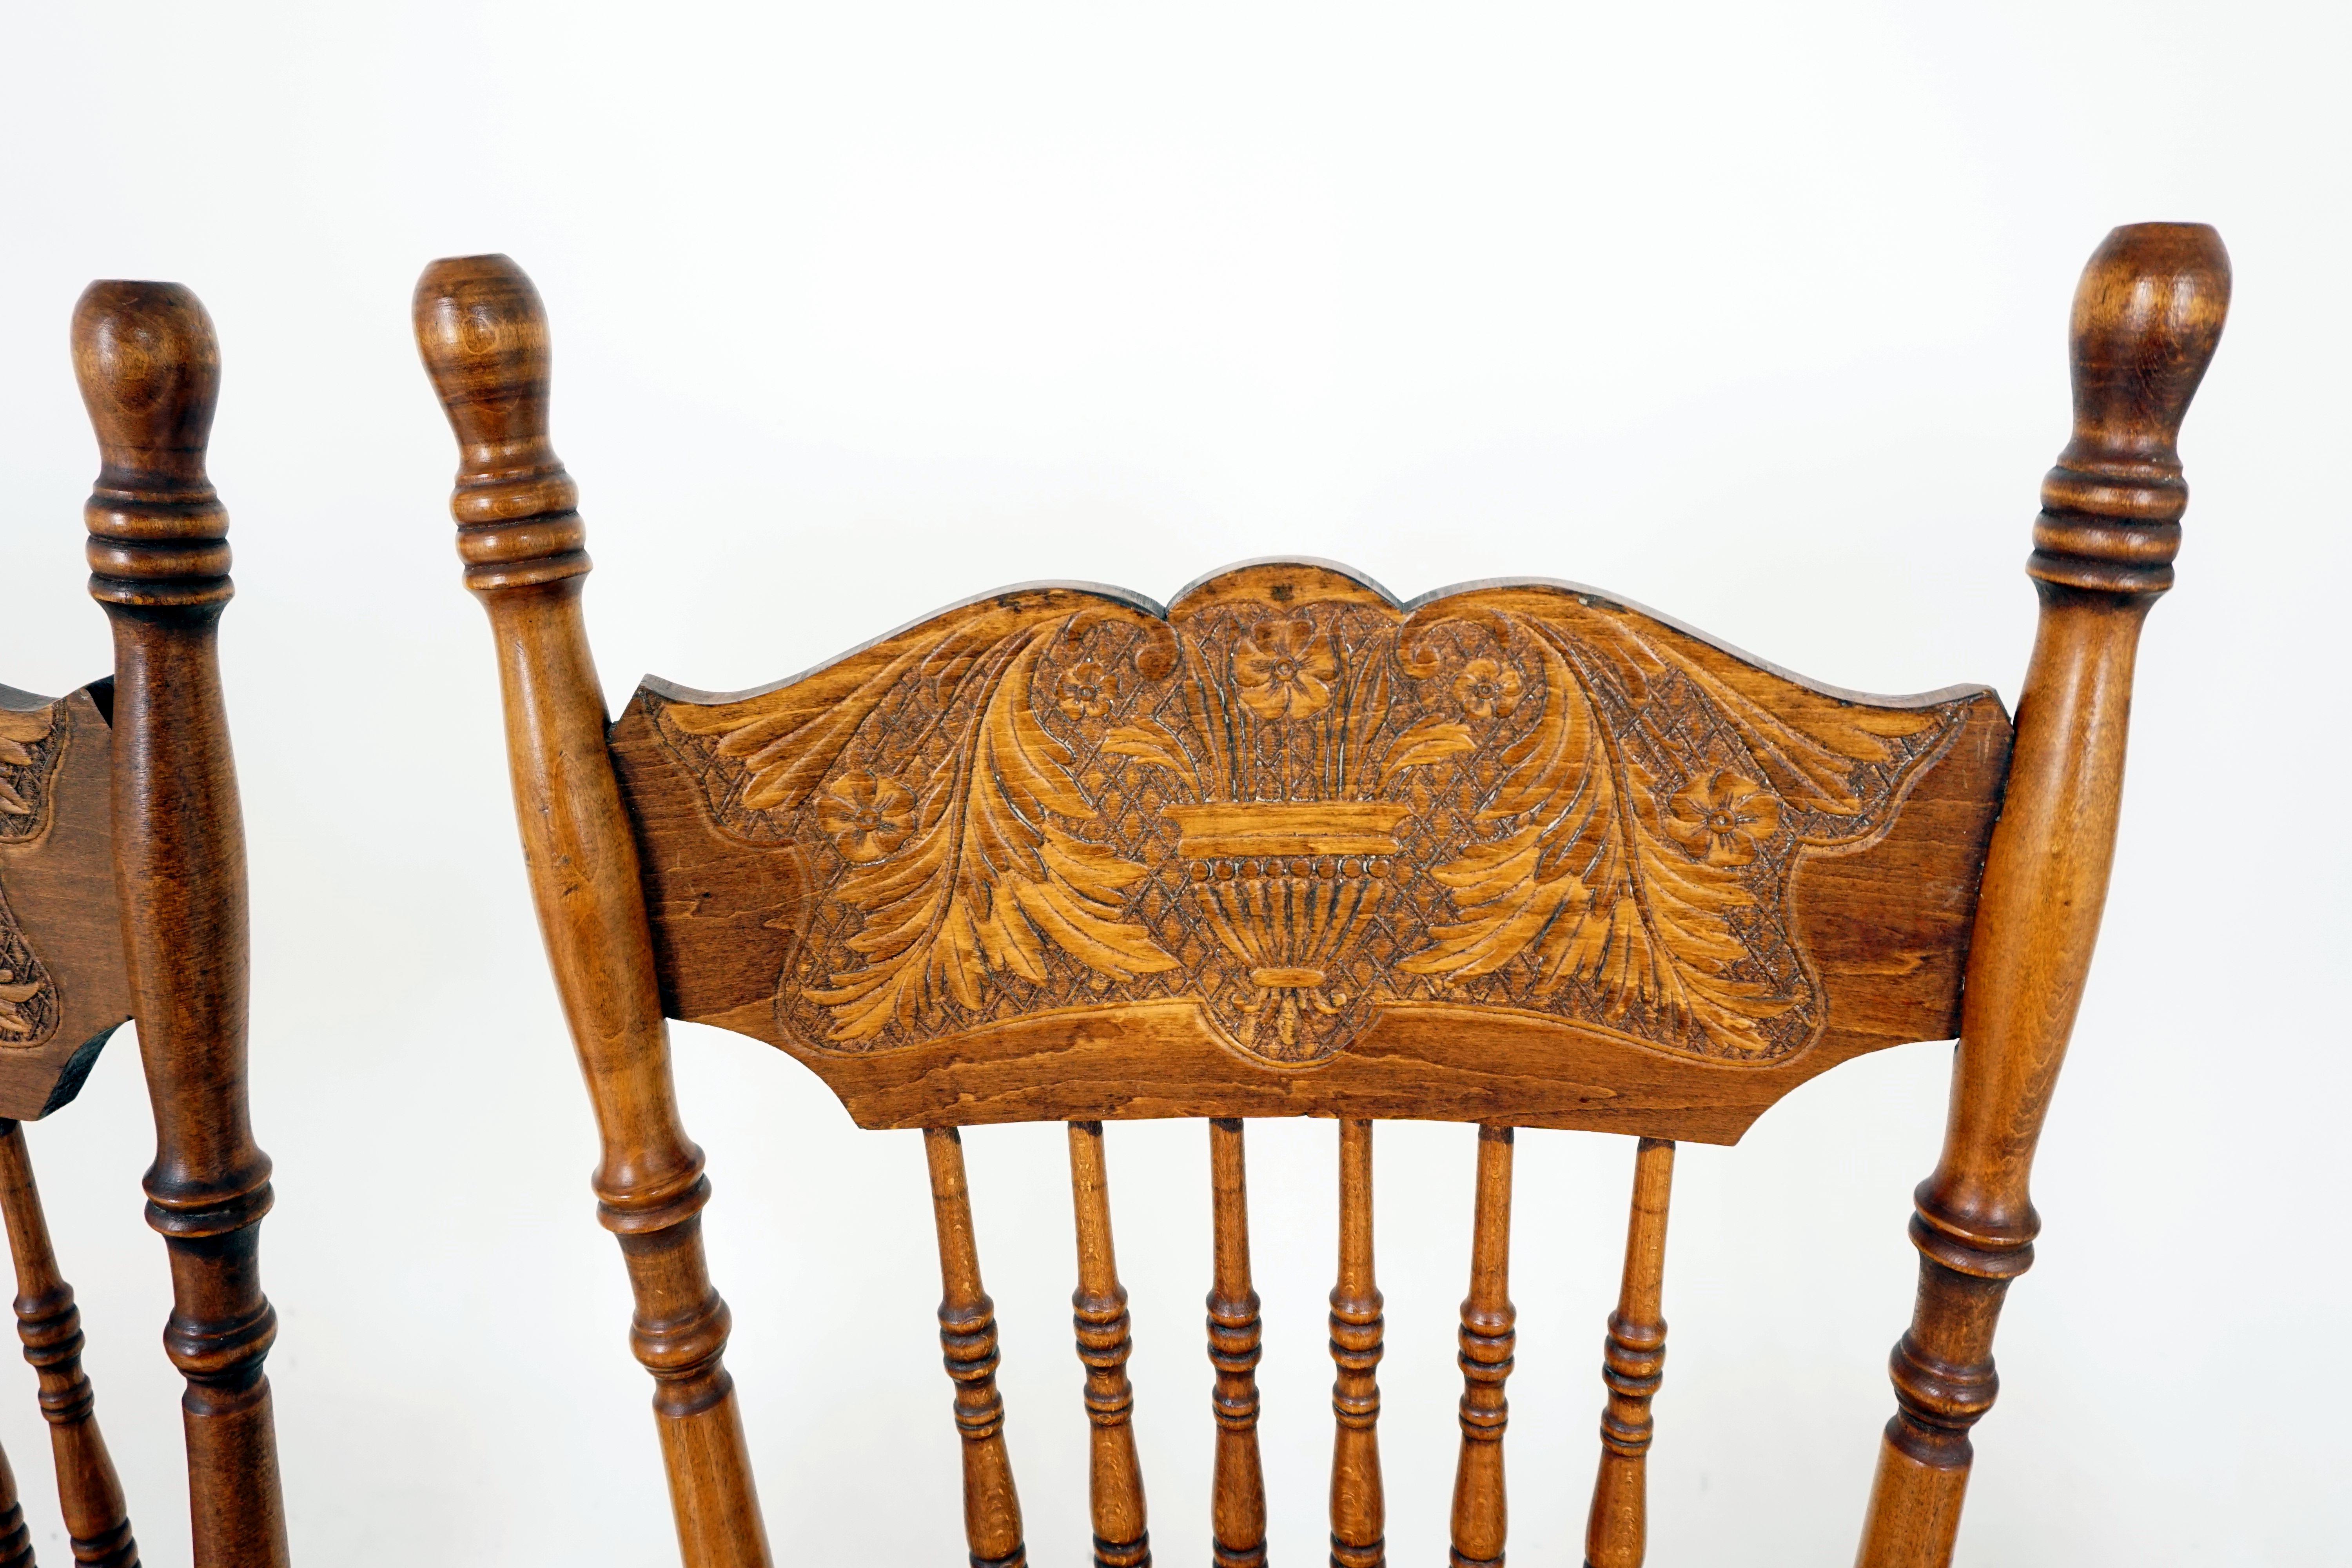 Antique dining chairs, set of 4 press back kitchen chairs, antique furniture, Canada, 1900

Canada, 1900
Solid beechwood
High supports to the back
Carved press back on top
Six turned spindles underneath
Fir plywood seat
Standing on turned